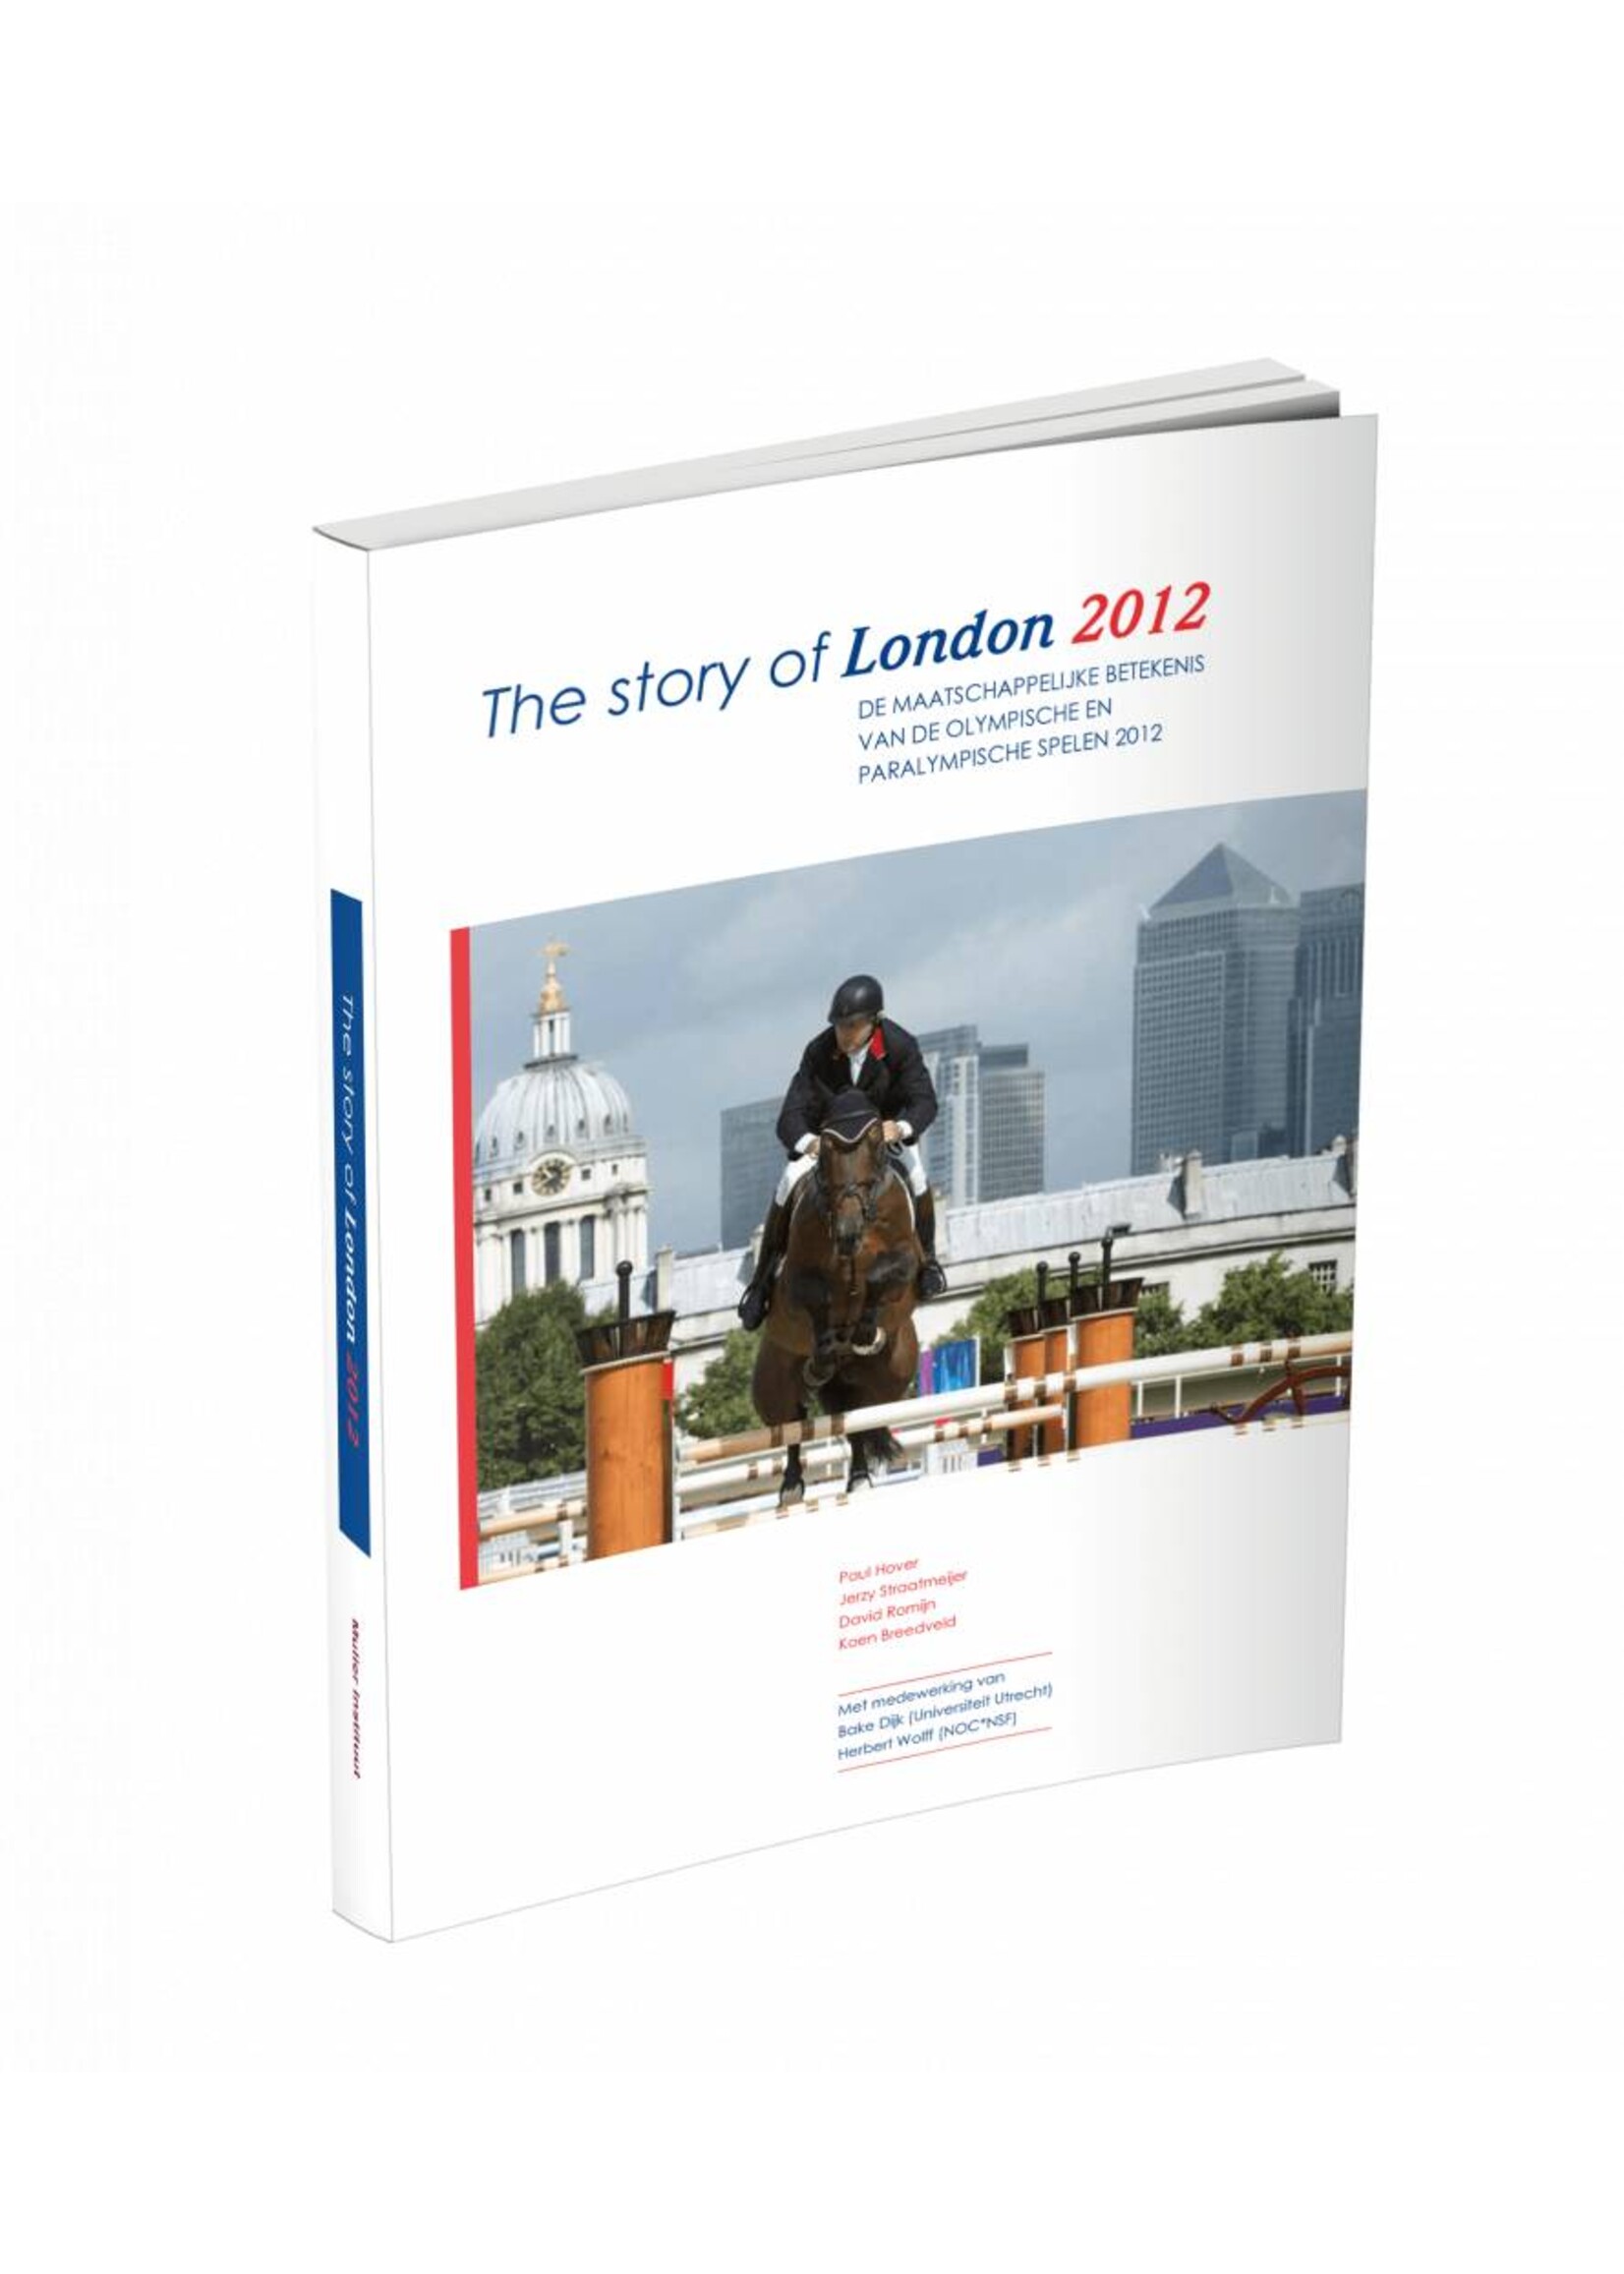 The story of London 2012